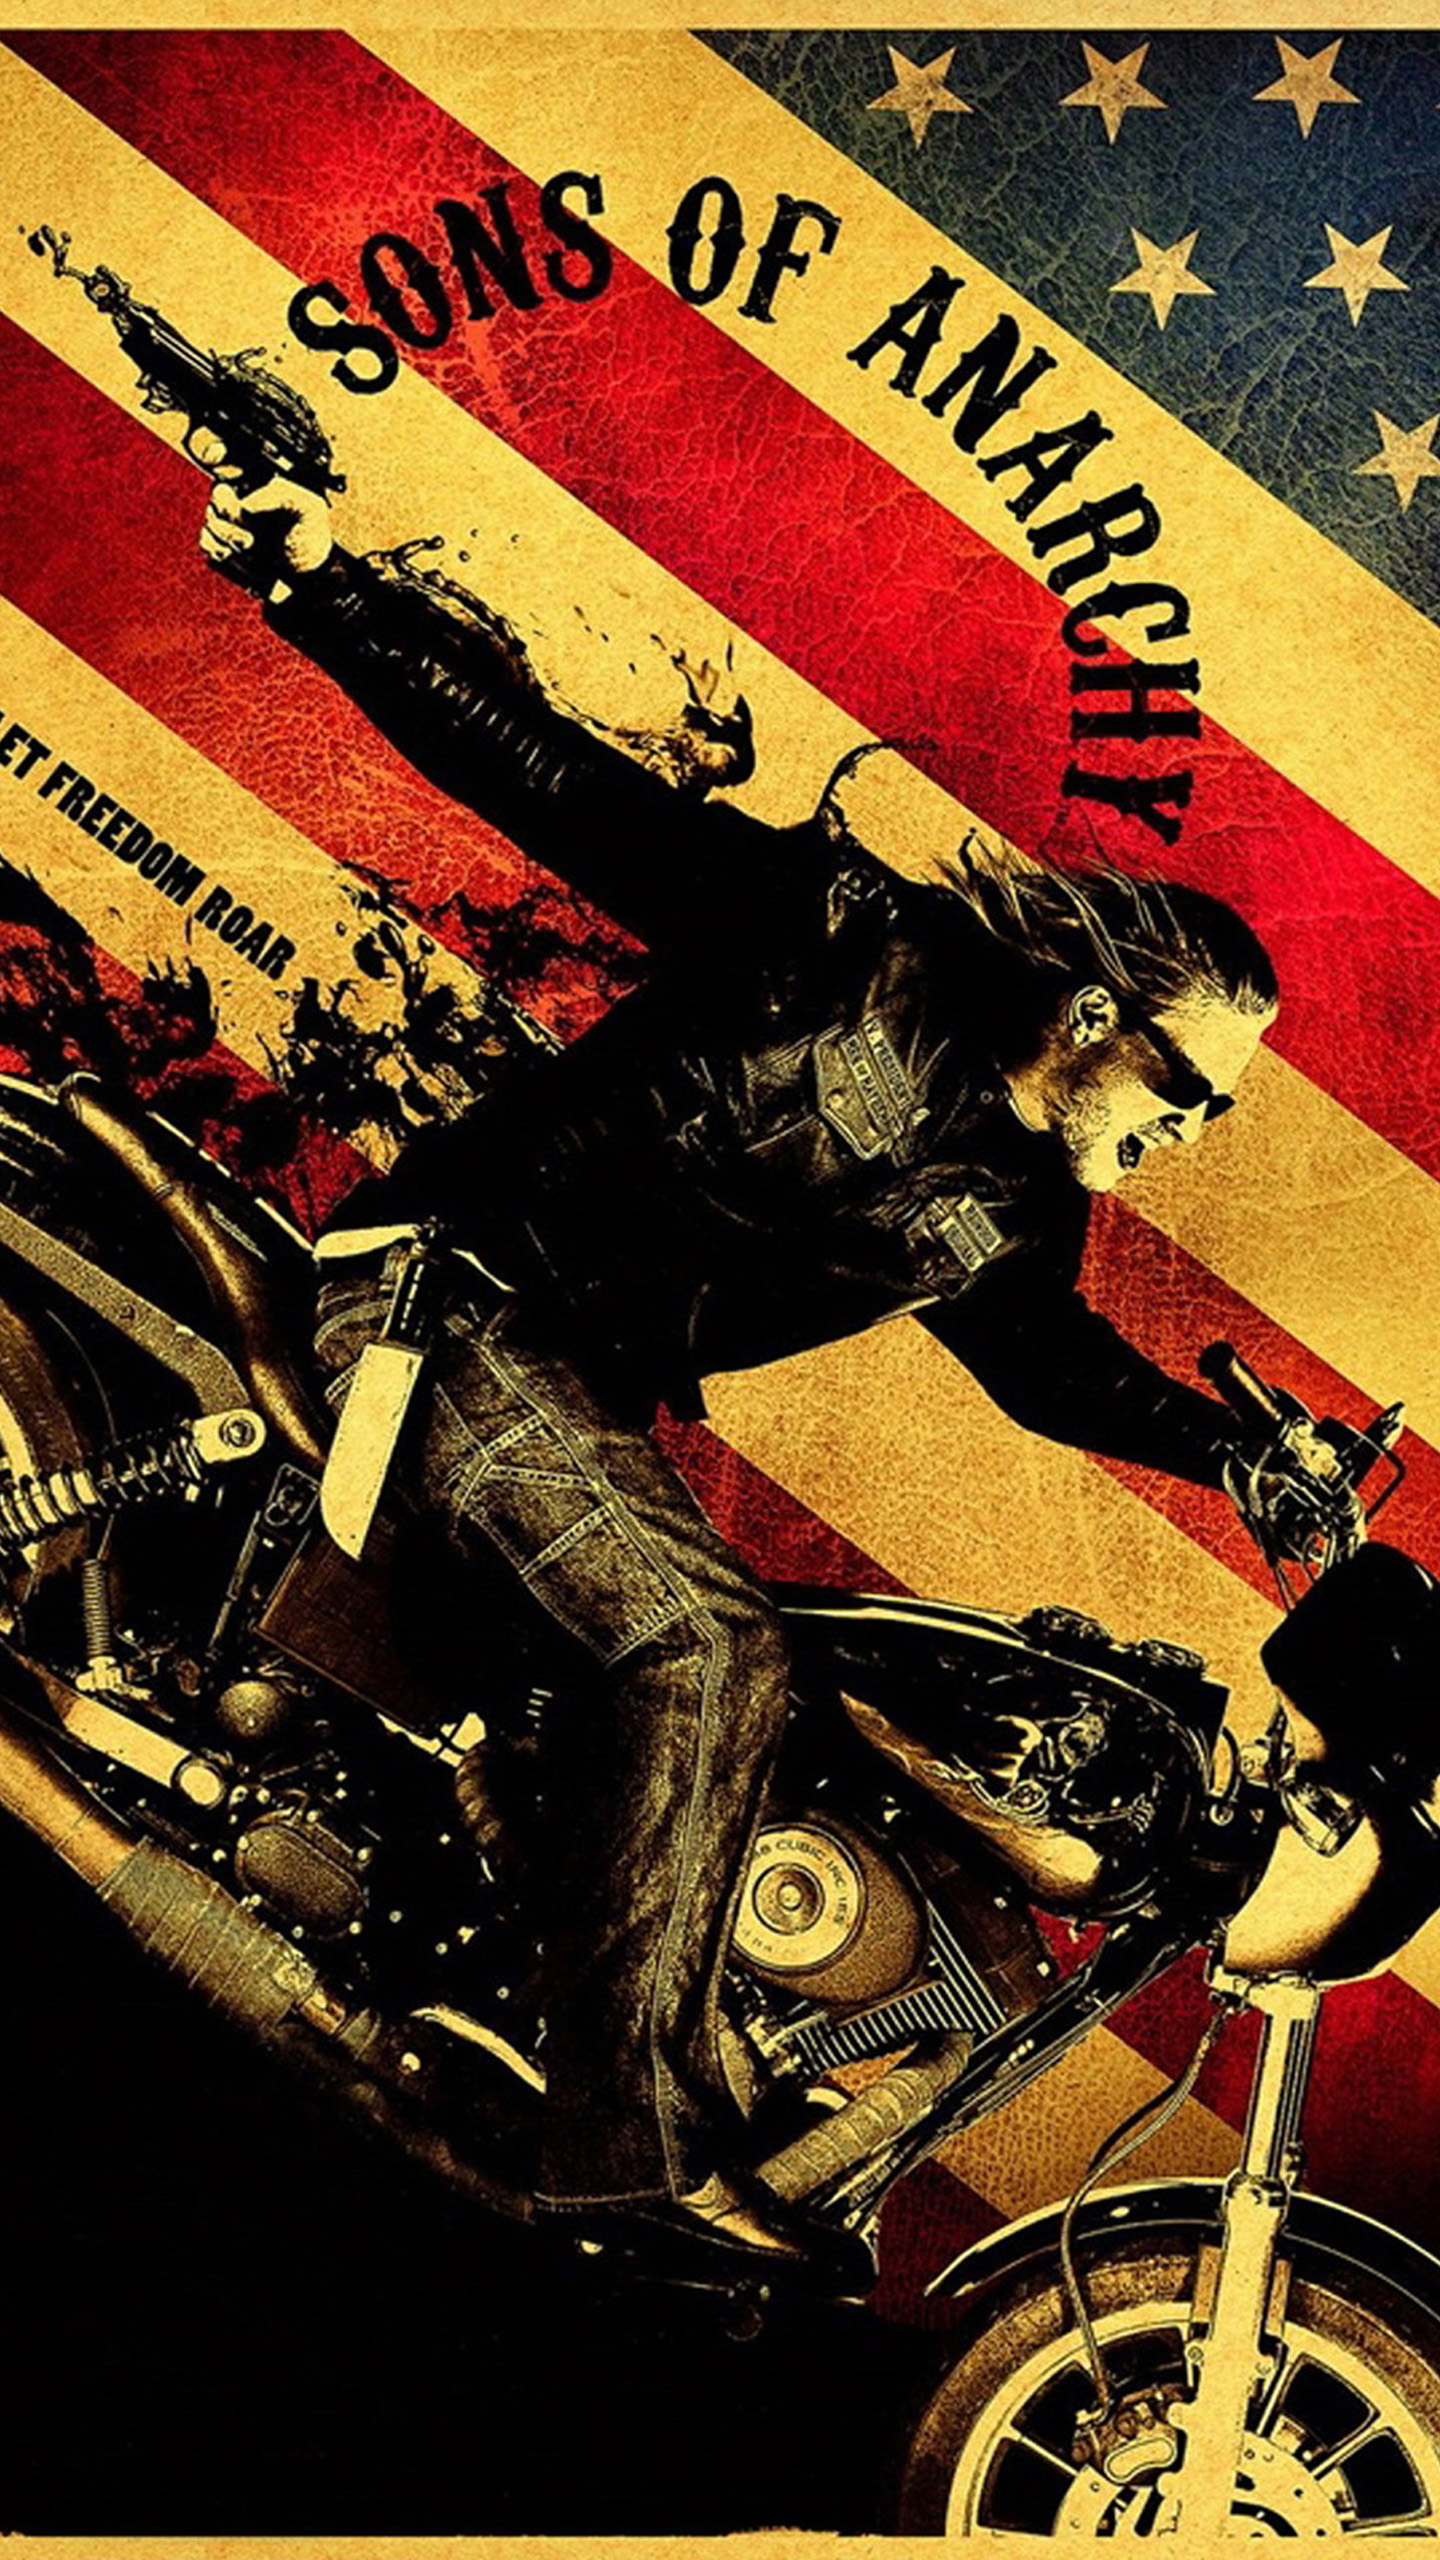 SONS OF ANARCHY Galaxy S6 Wallpaper | Galaxy S6 Wallpapers